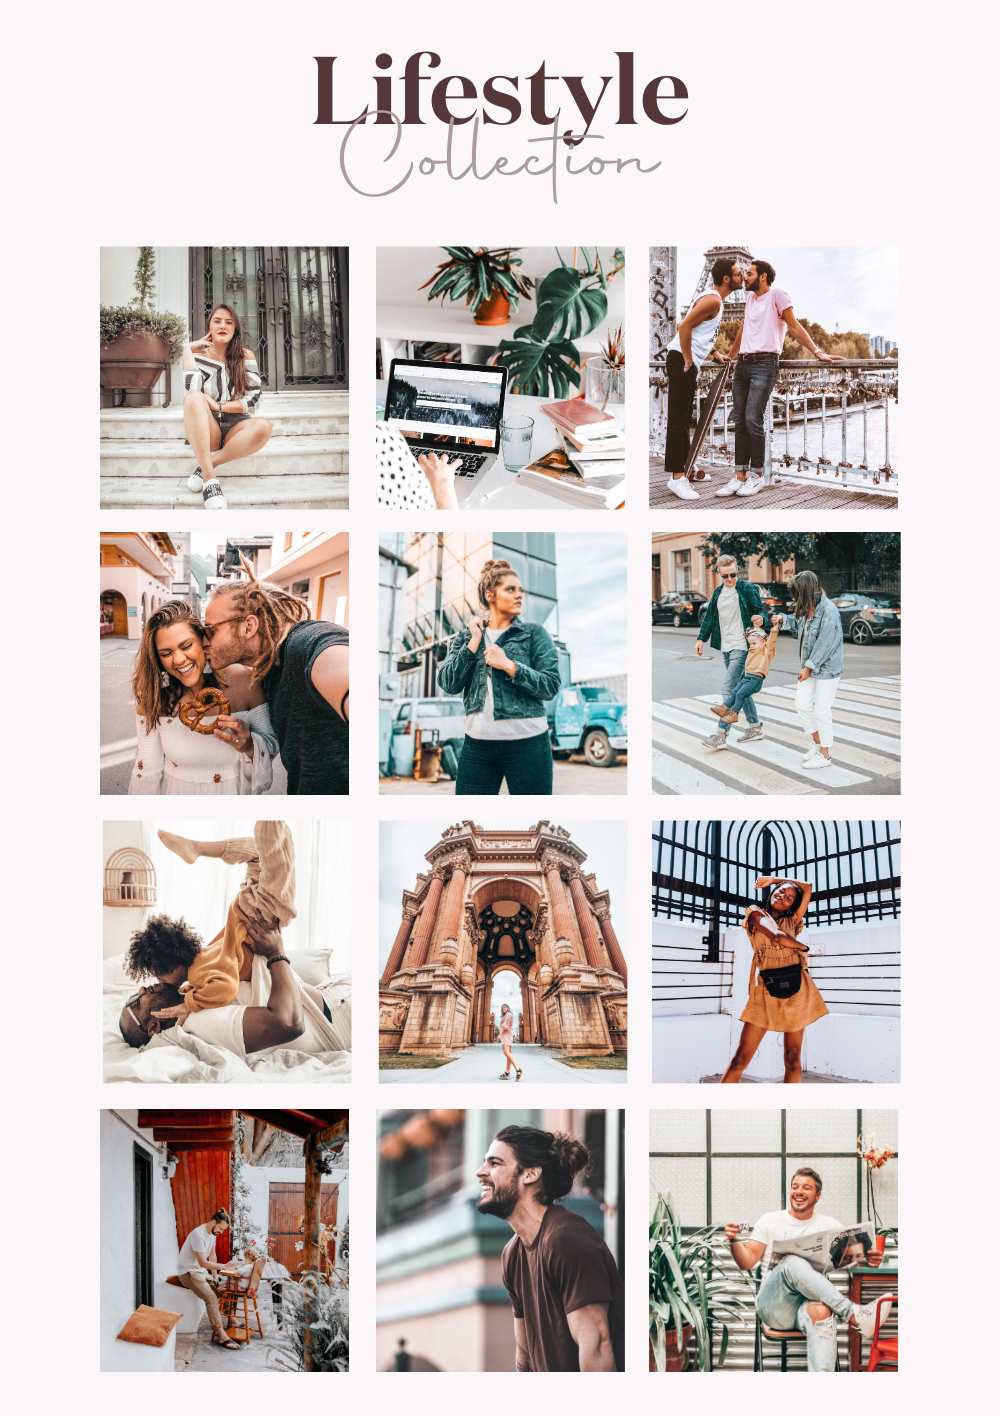 Lifestyle Collection (Presets) - Creative Kits